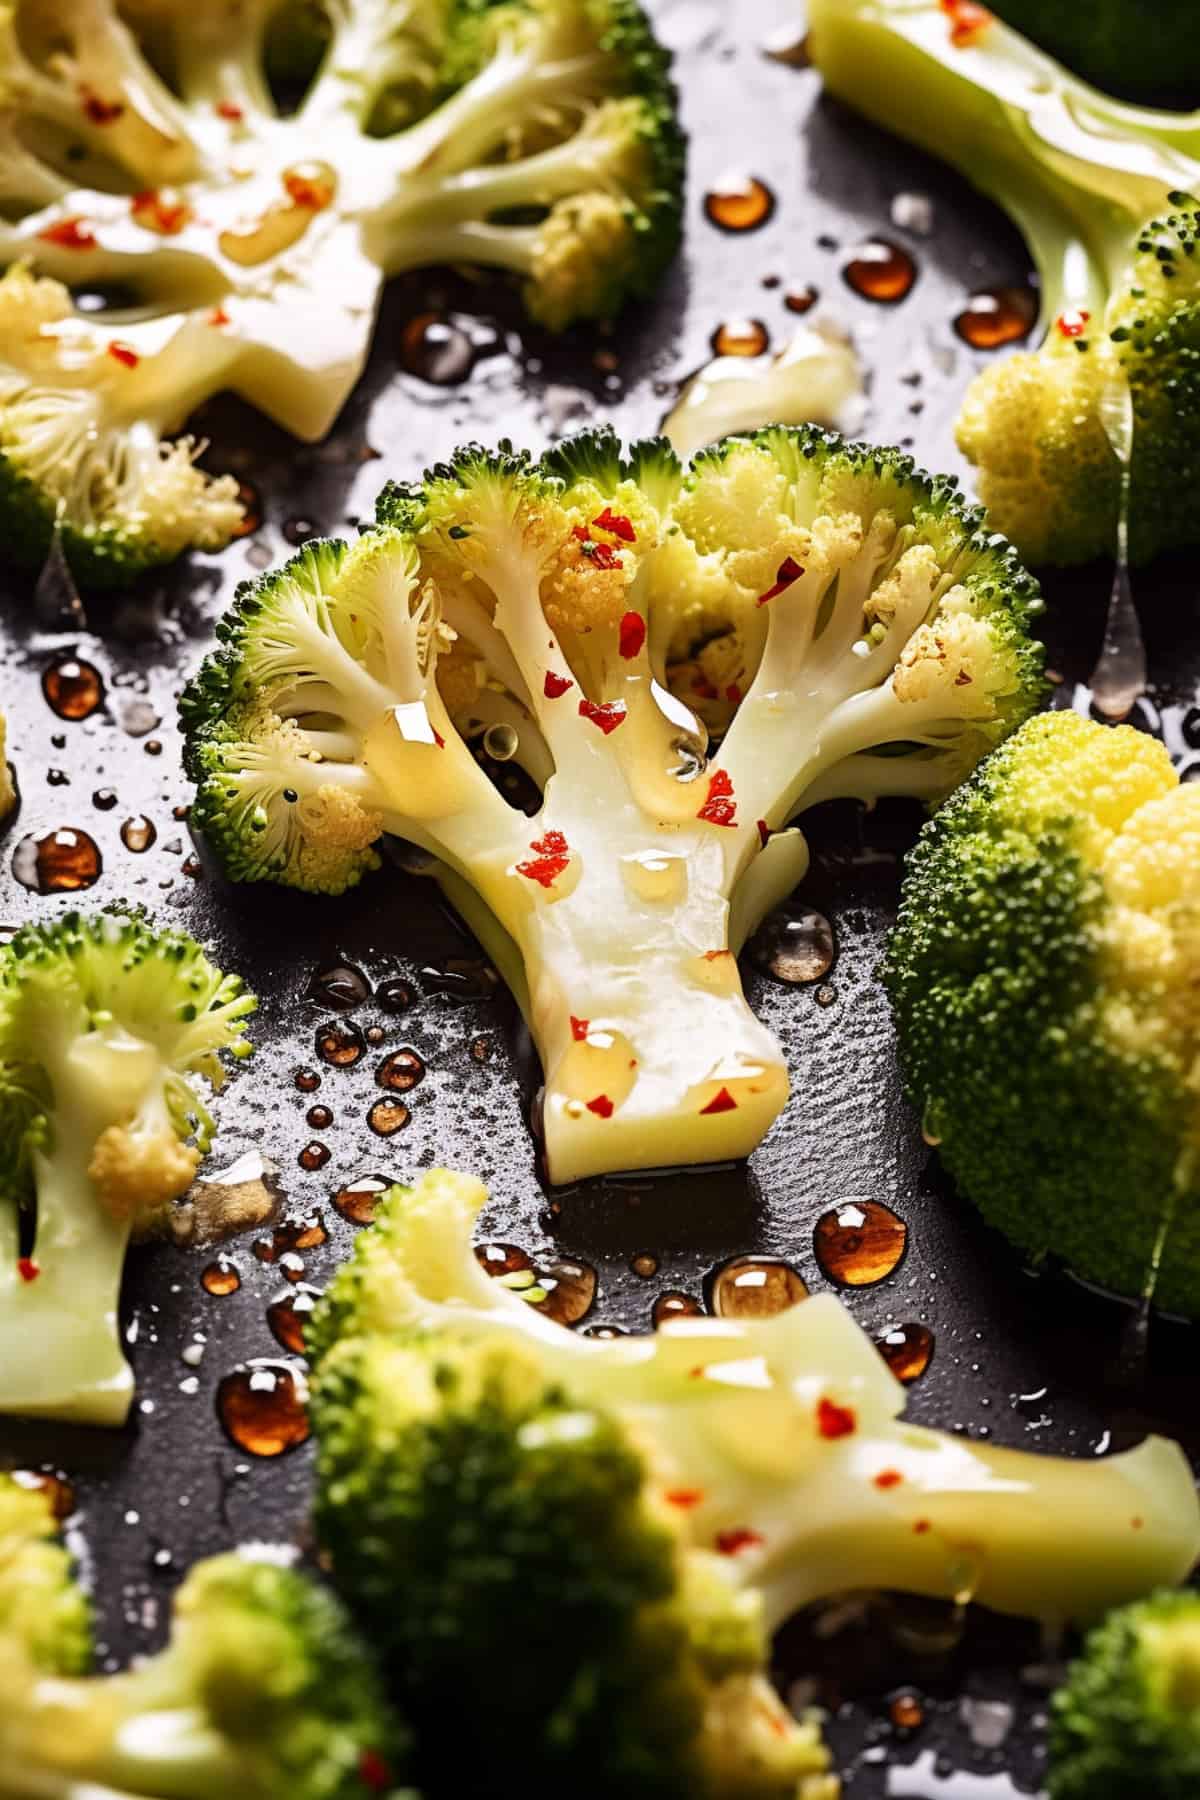 Broccoli and cauliflower on a baking tray drizzled with olive oil.